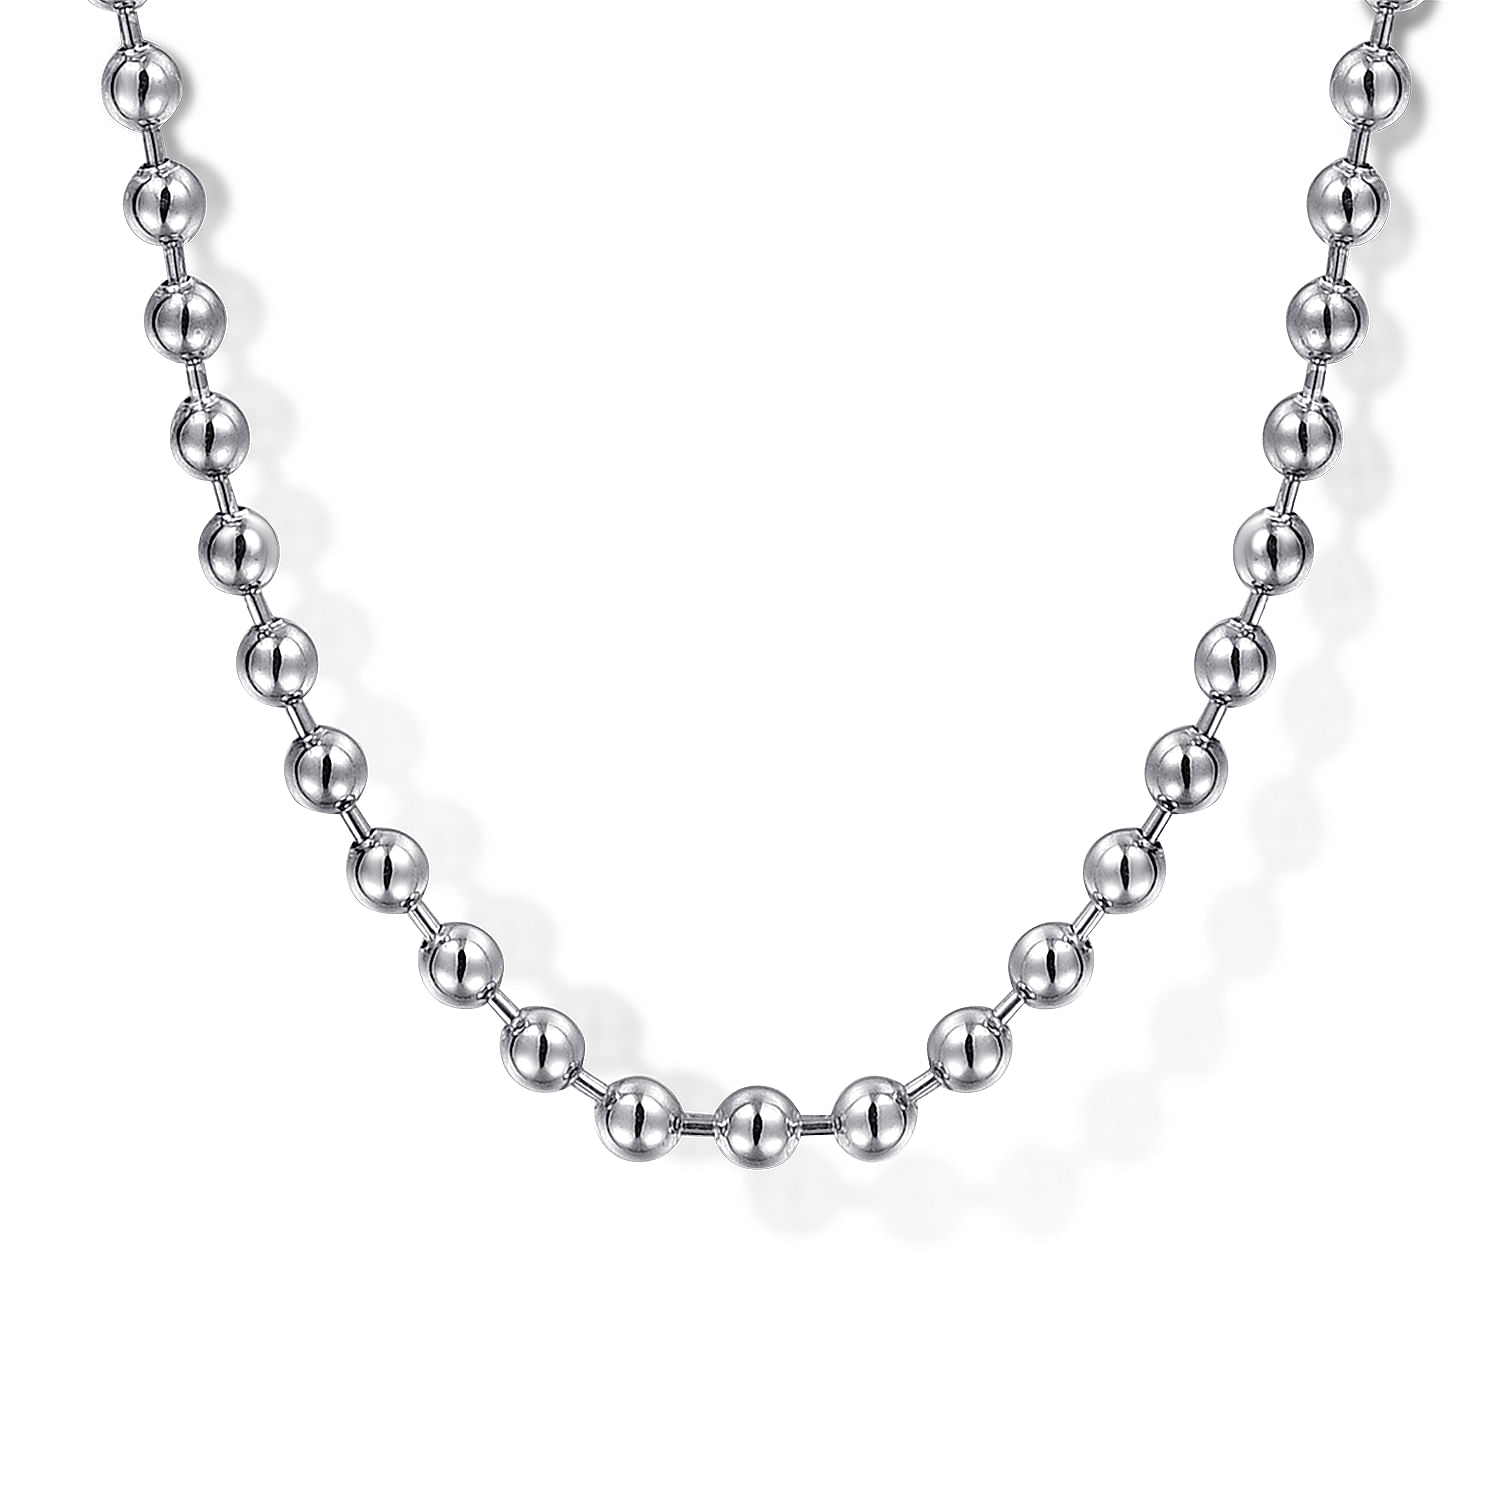 Gabriel - 22 Inch 925 Sterling Silver 3mm Ball Chain Necklace